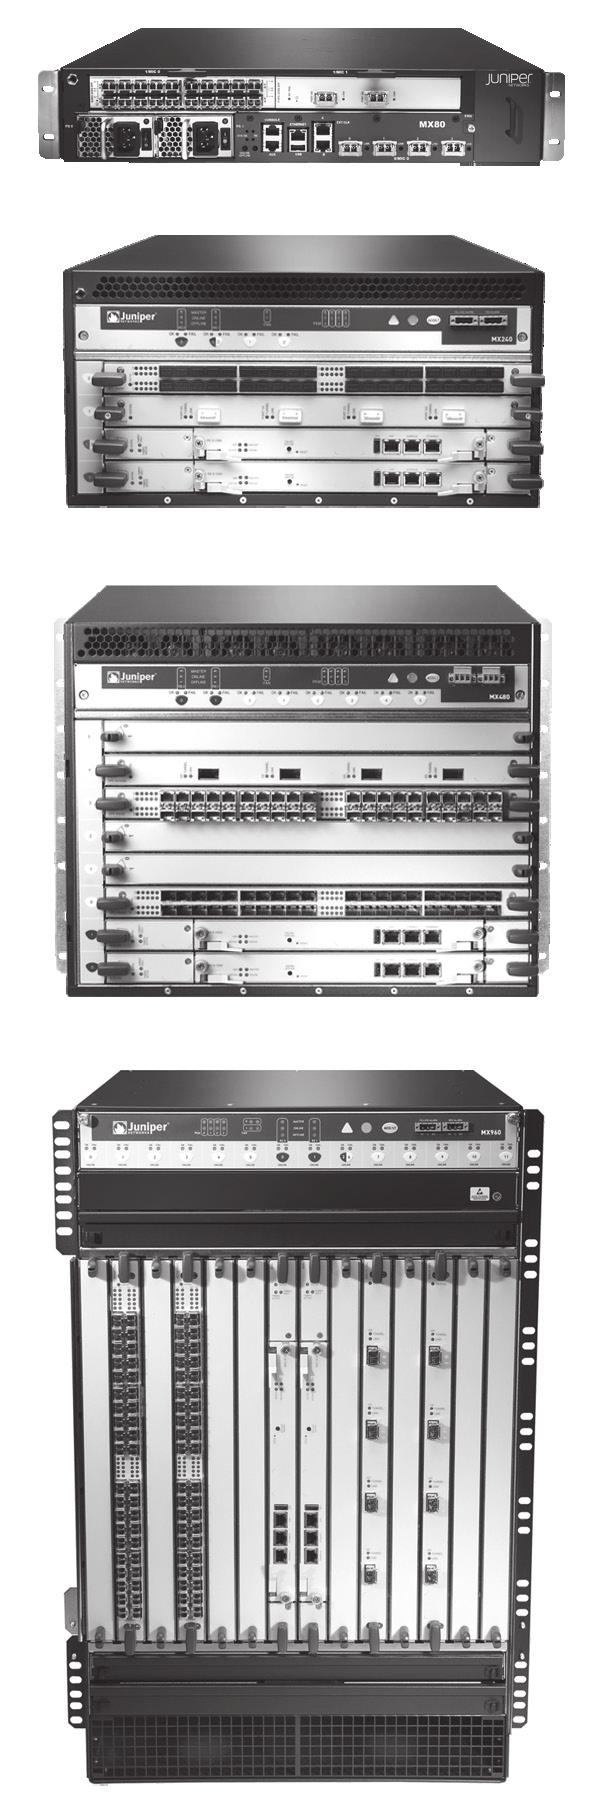 MX Series 3D Universal Edge Routers MX80 MX240 The Juniper Networks MX Series 3D routers is a family of high-performance Ethernet services routers, providing unmatched flexibility and reliability to